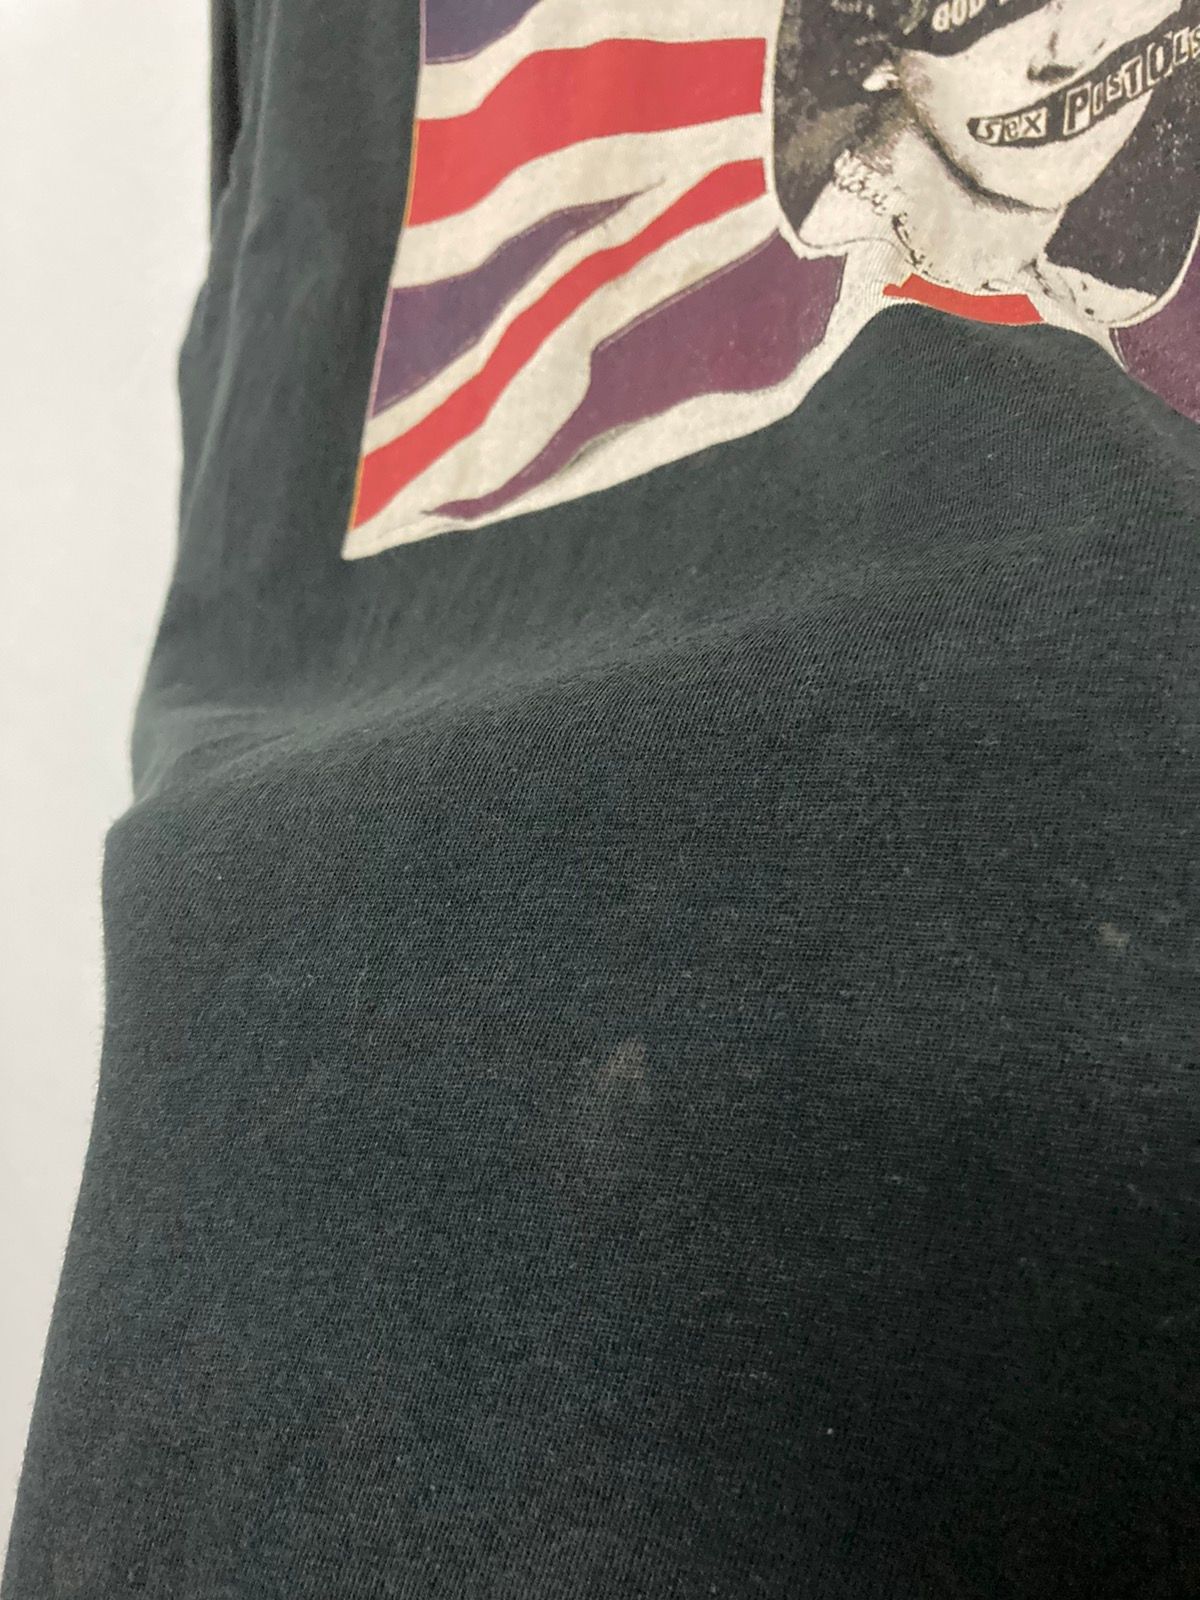 Vintage 90s Paul Smith x Sex Pistols God Save The Queen Tee - 13